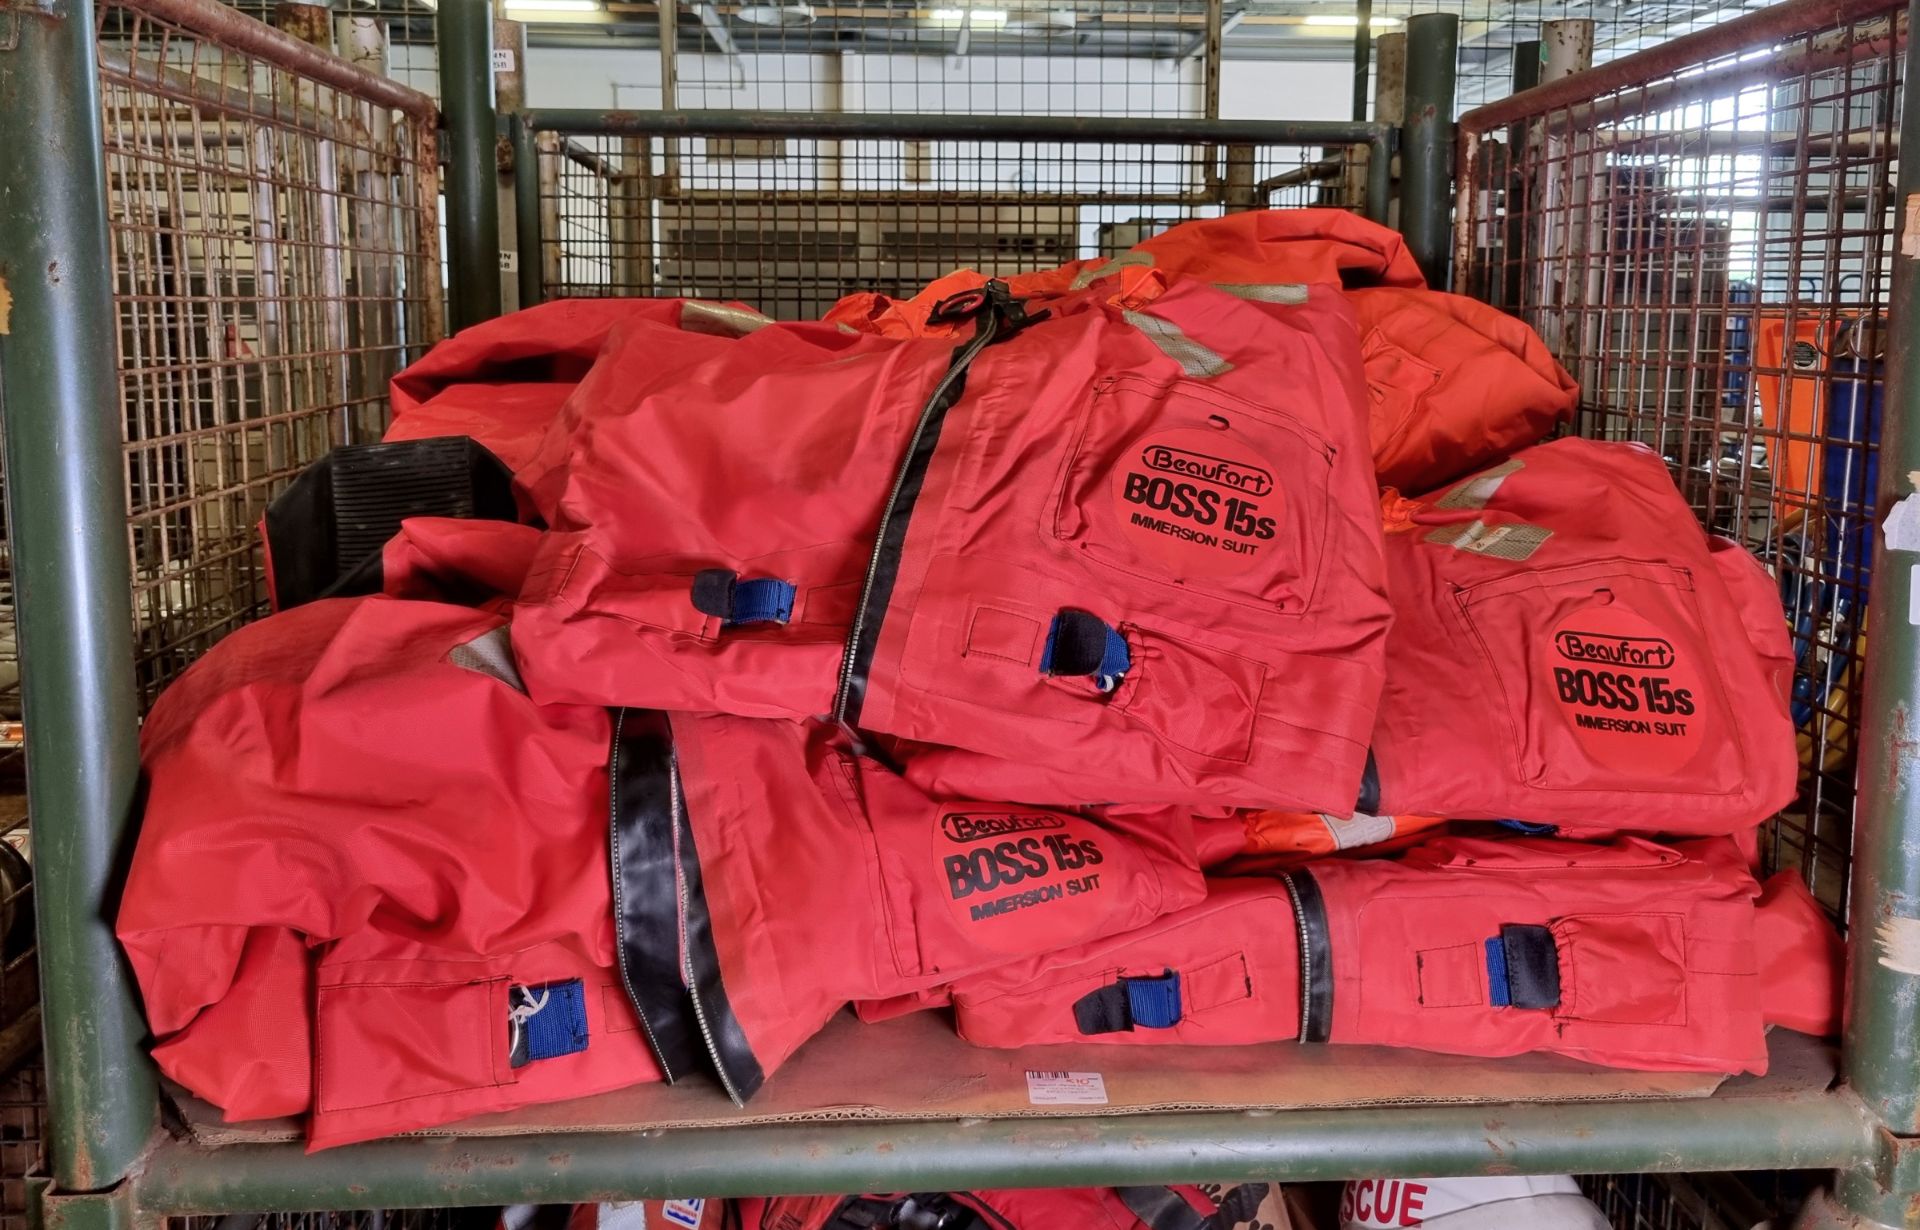 10x Beaufort offshore survival suits - UNCERTIFIED - NOT SAFETY TESTED